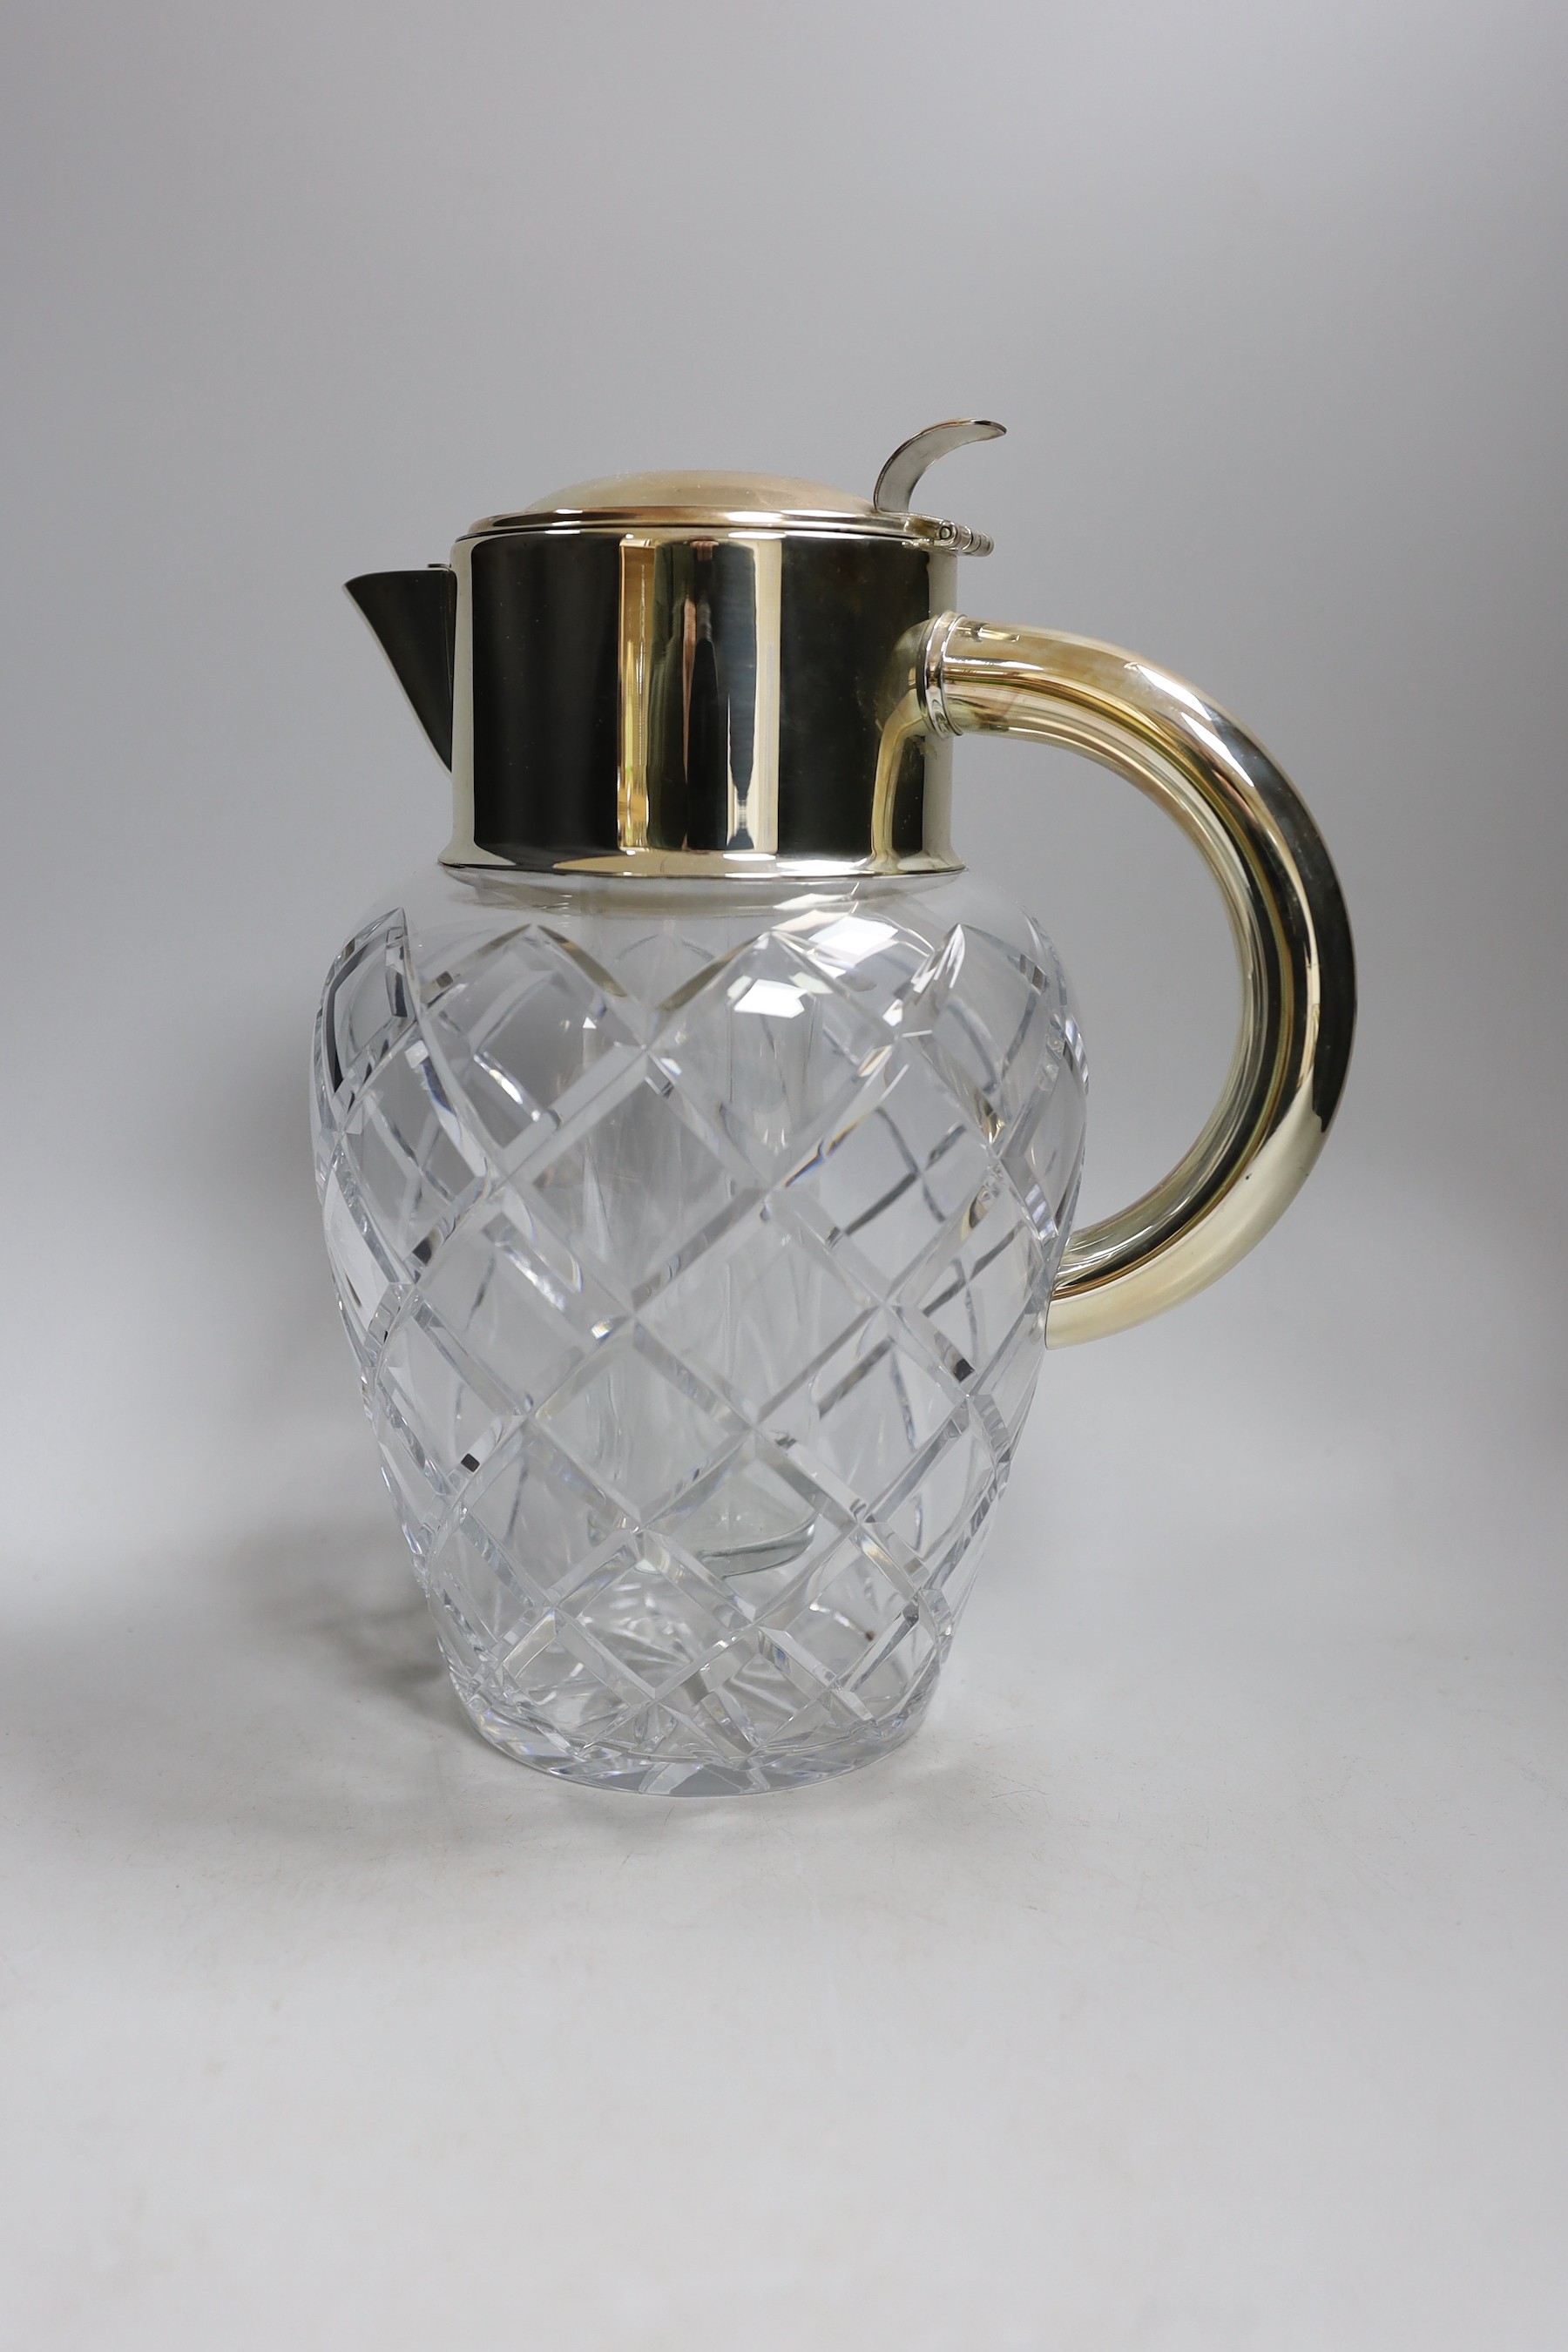 A large cut glass and silver plated jug, possibly for Pimms. 28cm tall